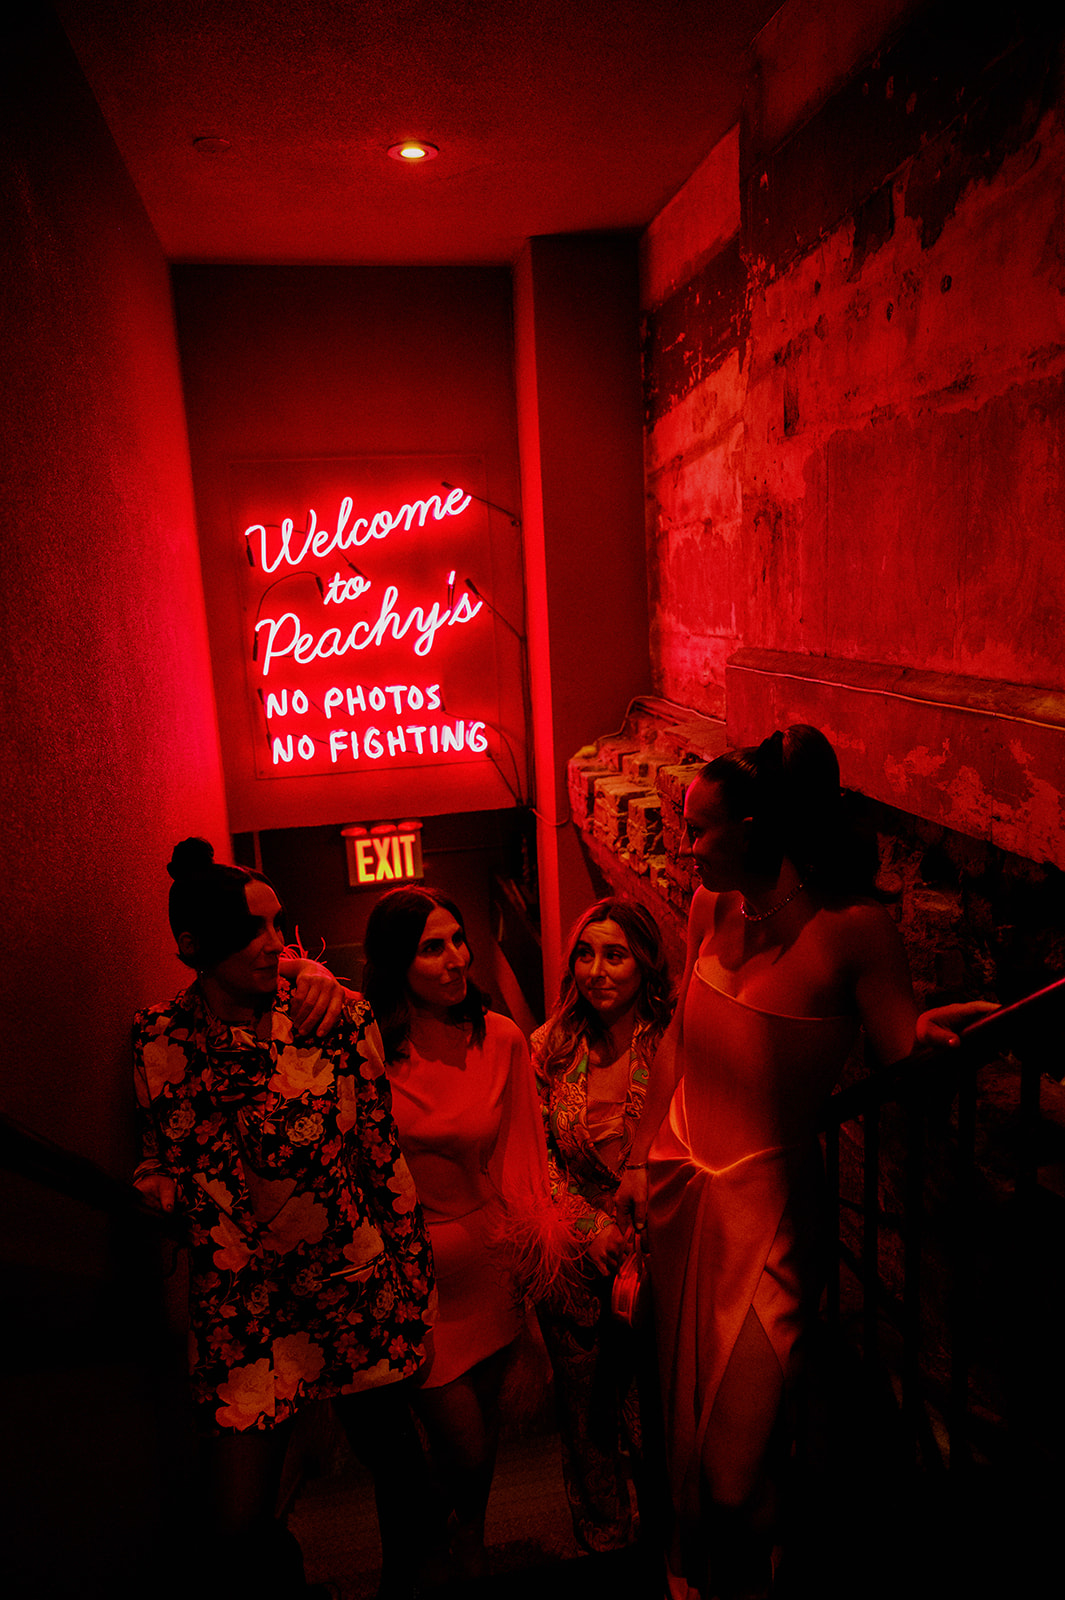 Bride Caroline and sisters posing under the red neon glow of the Welcome to Peachy's sign in Chinatown for her bridal shower.